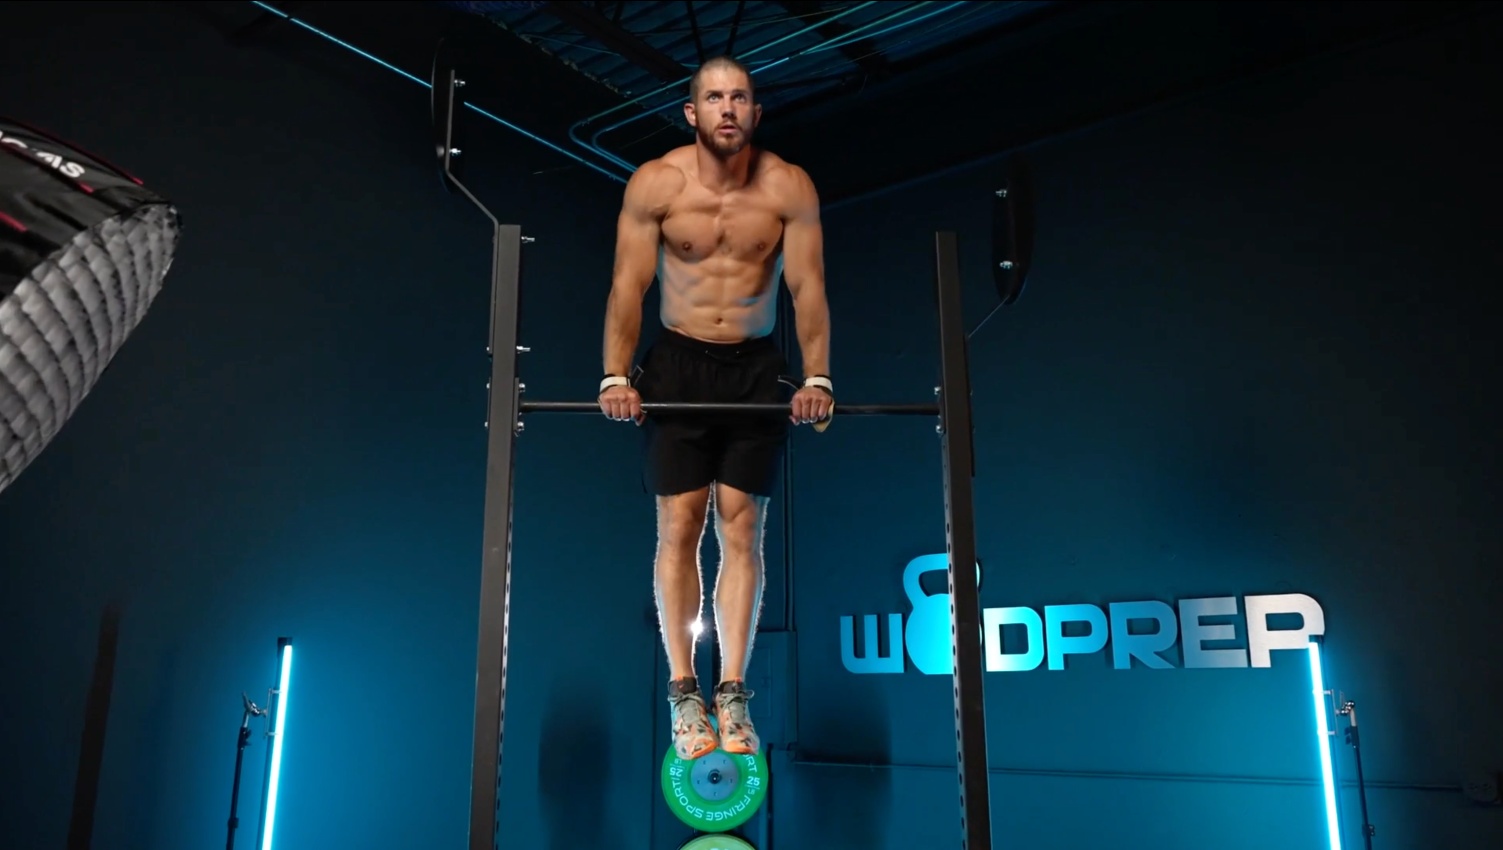 Does CrossFit Have a Future?